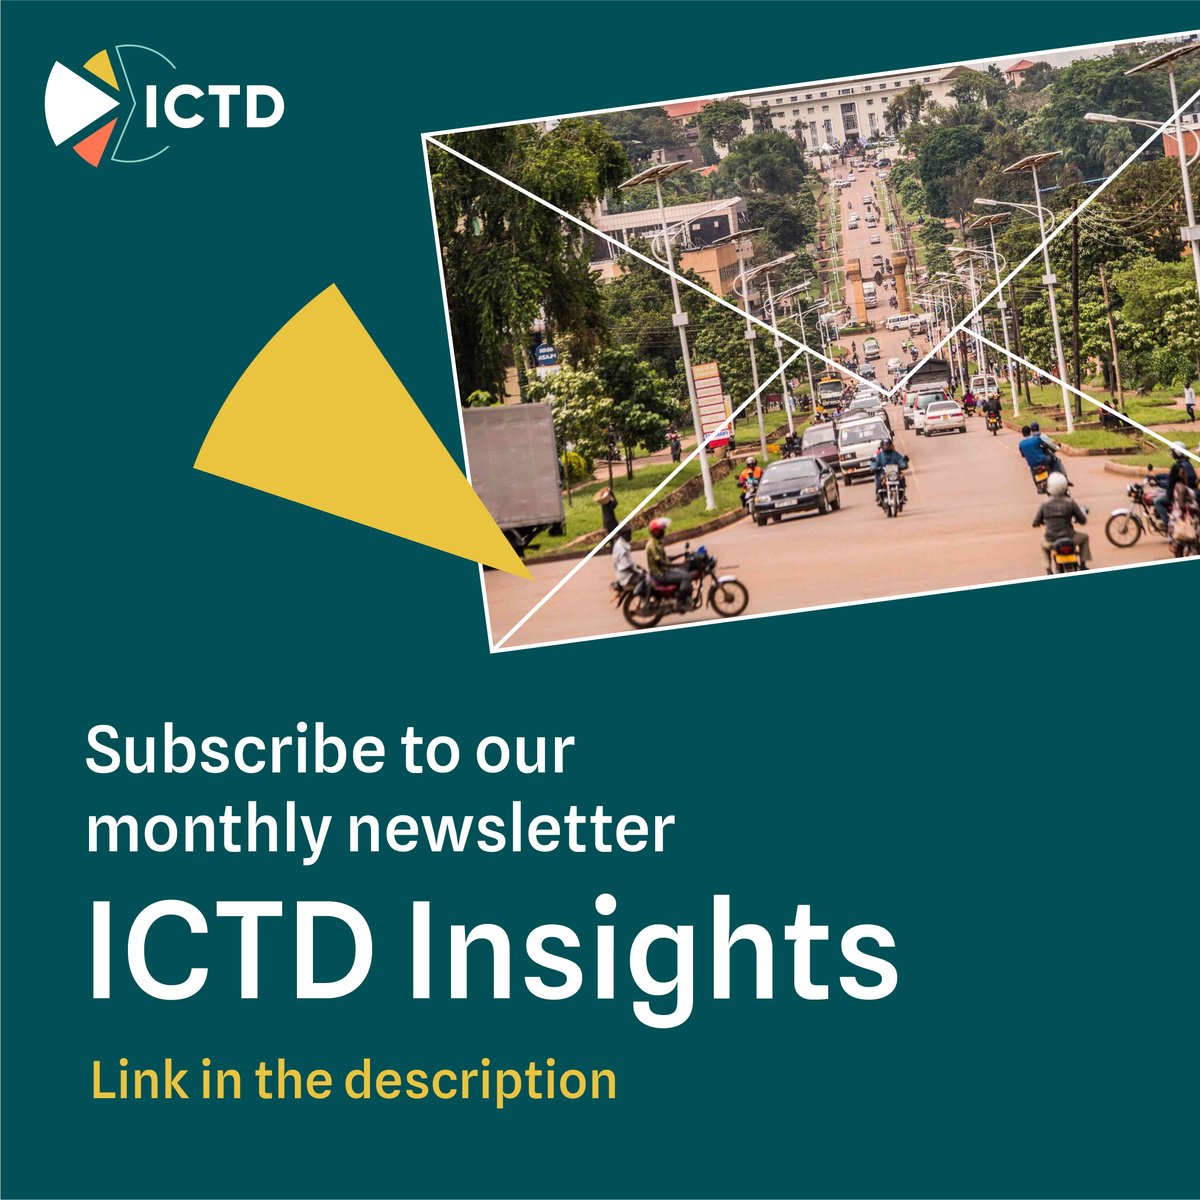 Should governments set realistic or optimistic tax targets? Read experts' opinions in the latest issue of 'ICTD Insights' ➡️ ow.ly/XRVN50Rsu4U 📫Subscribe here to receive the next edition of our monthly newsletter: ow.ly/40Sn50QxVQI #TaxTwitter